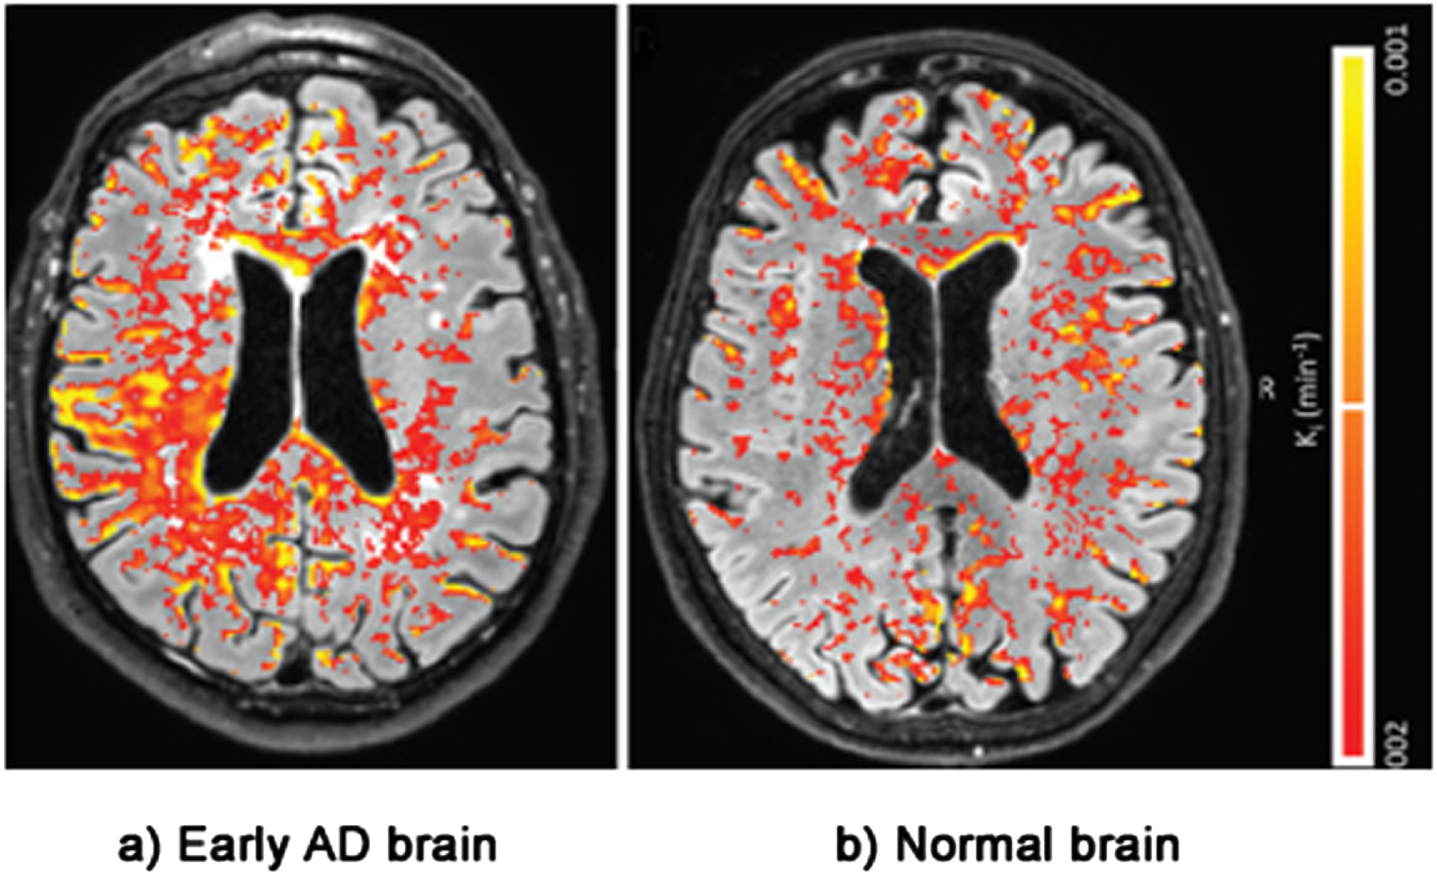 Evidence of BBB damage in the AD brain: (a) extensive leakage of gadobutrol (an MRI contrasting agent) through a damaged BBB in brains of patients with early signs of AD; (b) less extensive leakage of the agent in brains of normal patients. Used with permission of The Radiological Society of North America, from van de Haar HJ, Burgmans S, Jansen JFA, van Osch MJP, van Buchem MA, Muller M, Hofman PAM, Verhey FRJ, Backes WH, Blood-brain barrier leakage in patients with early Alzheimer disease, Radiology (2016) 281, 527–535.